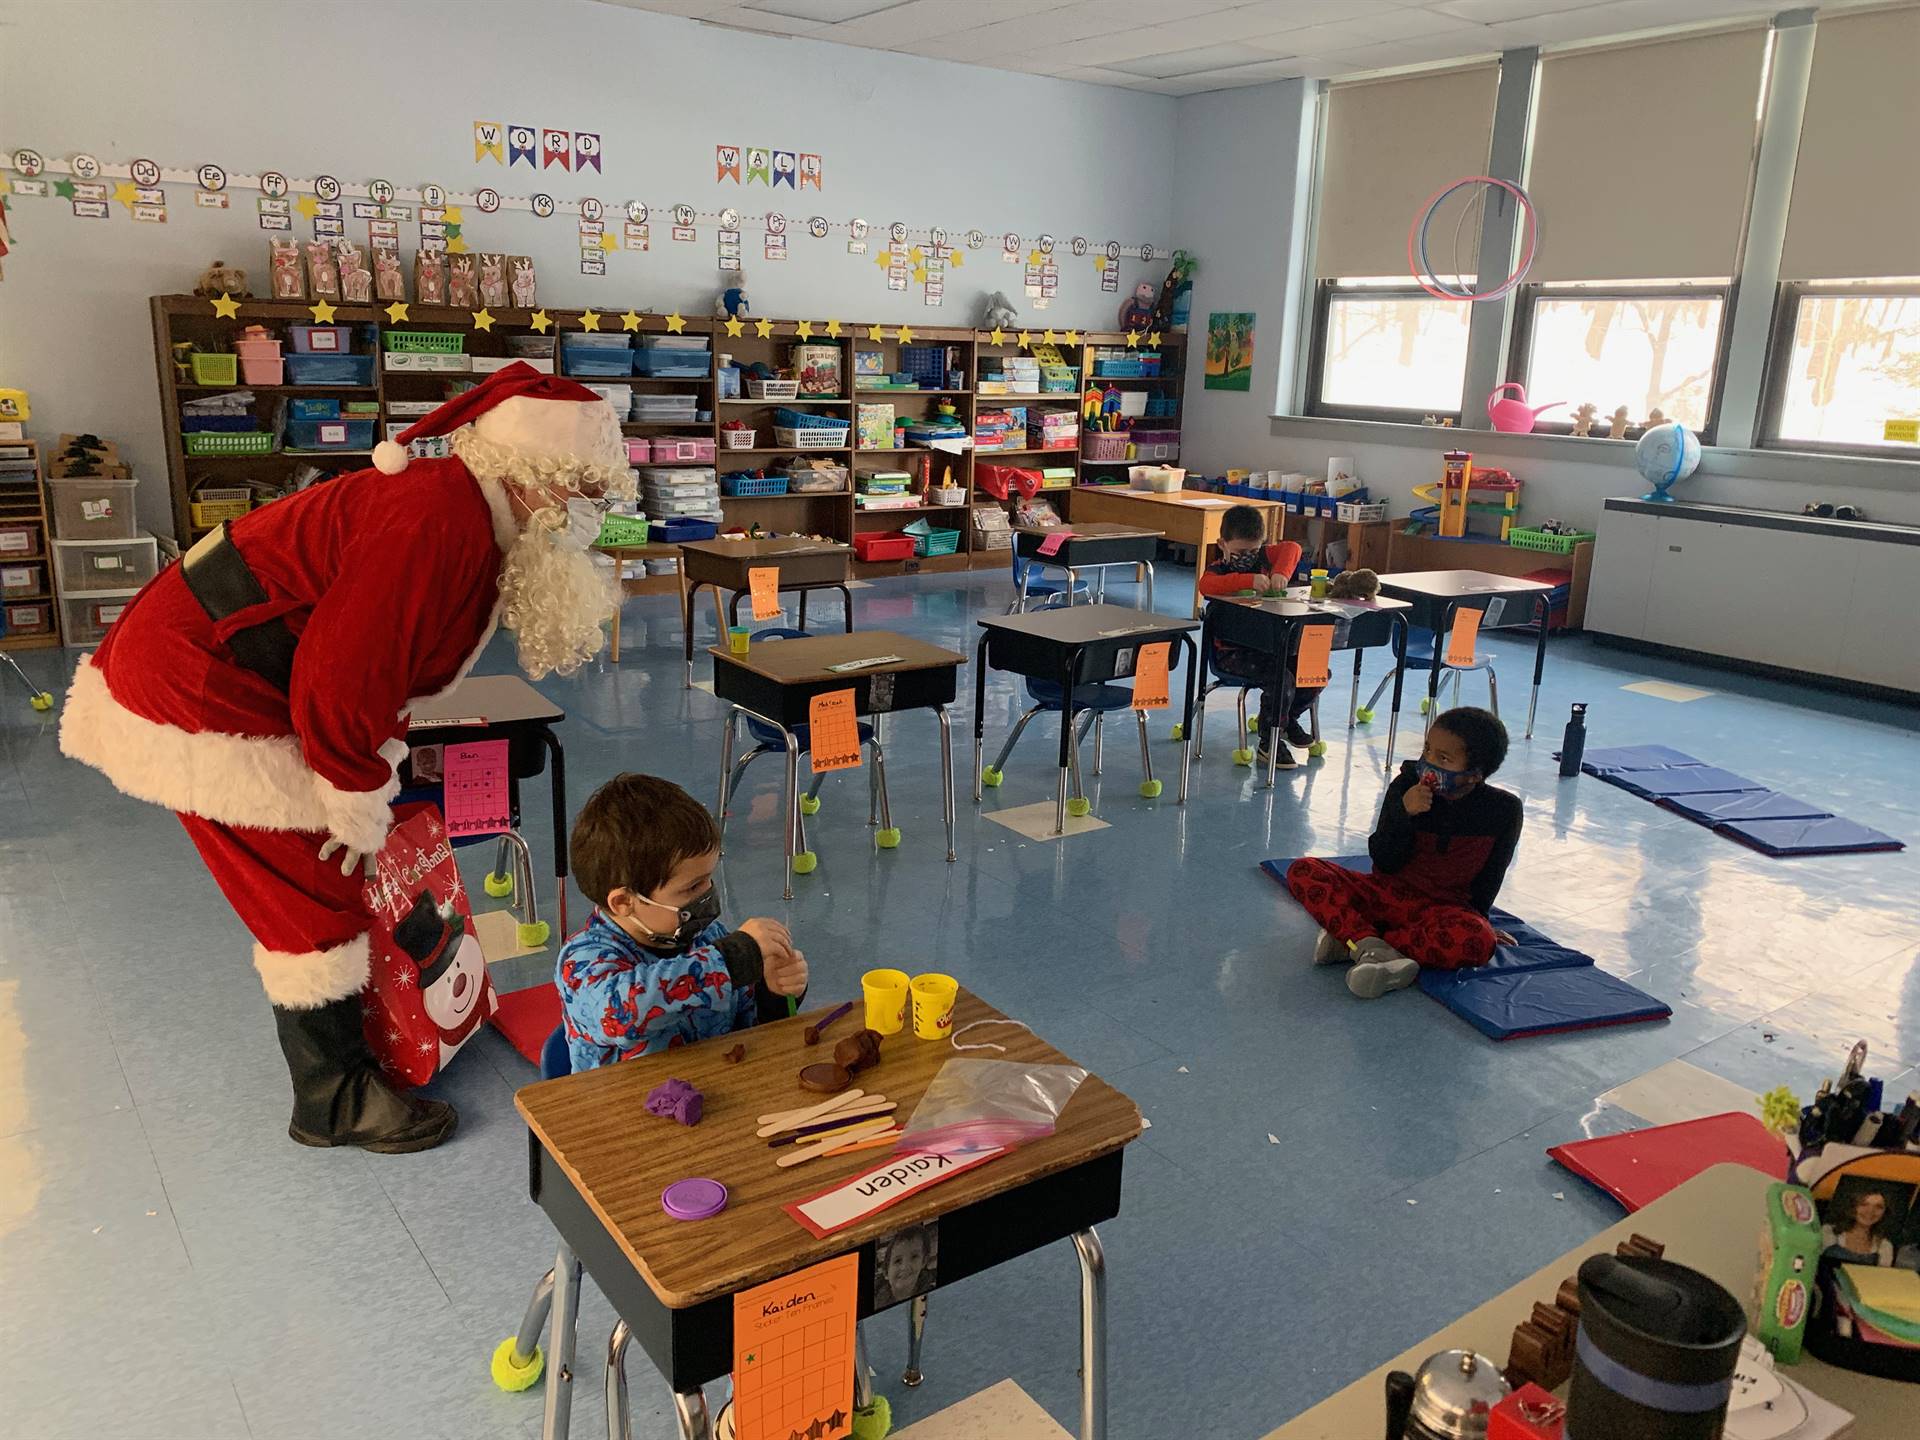 Santa looks at students in a classroom.